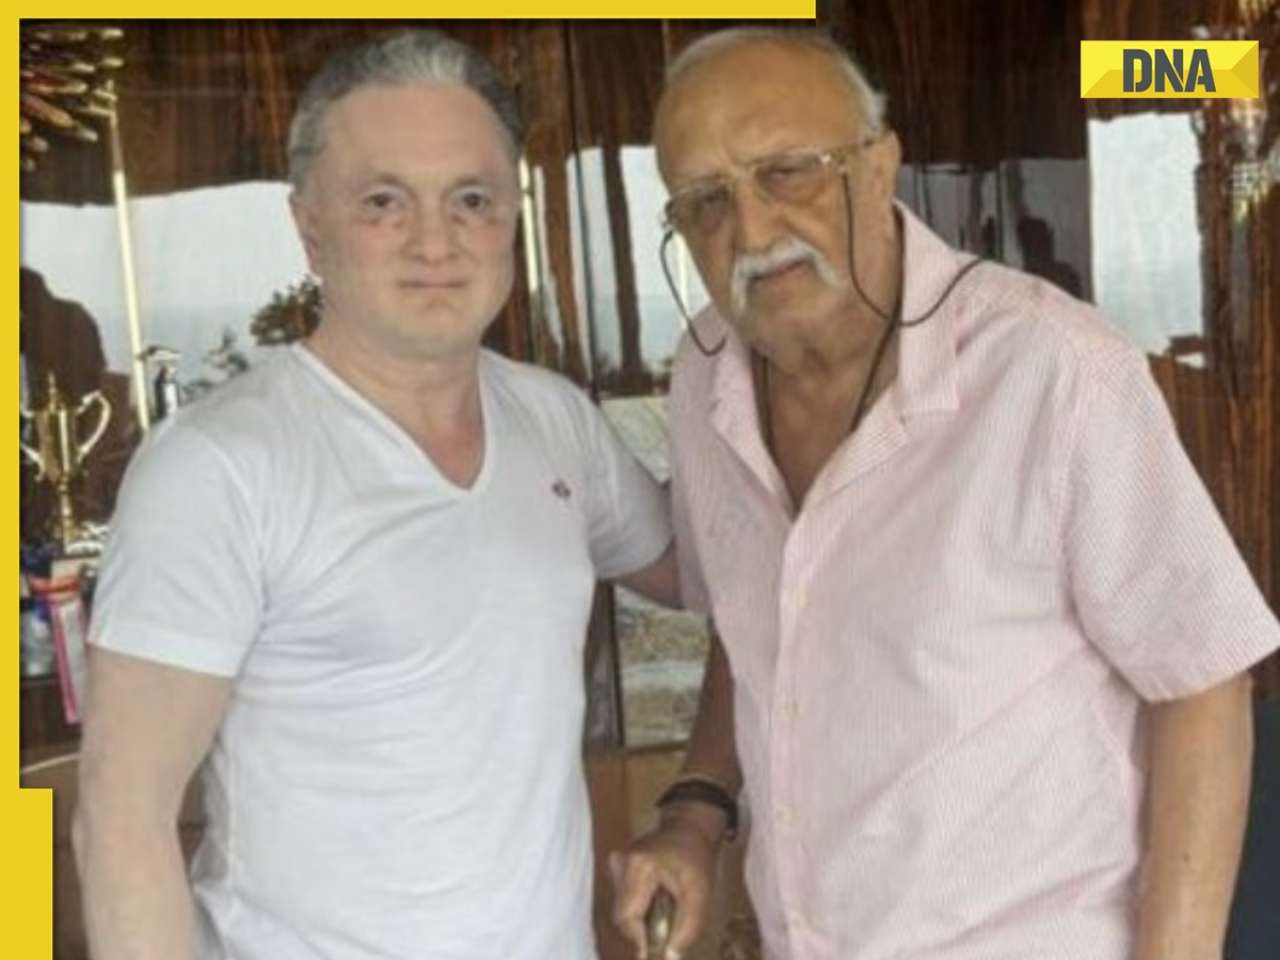 'Happy to...': Raymond chief Gautam Singhania shares pic with father Vijaypat months after public spat